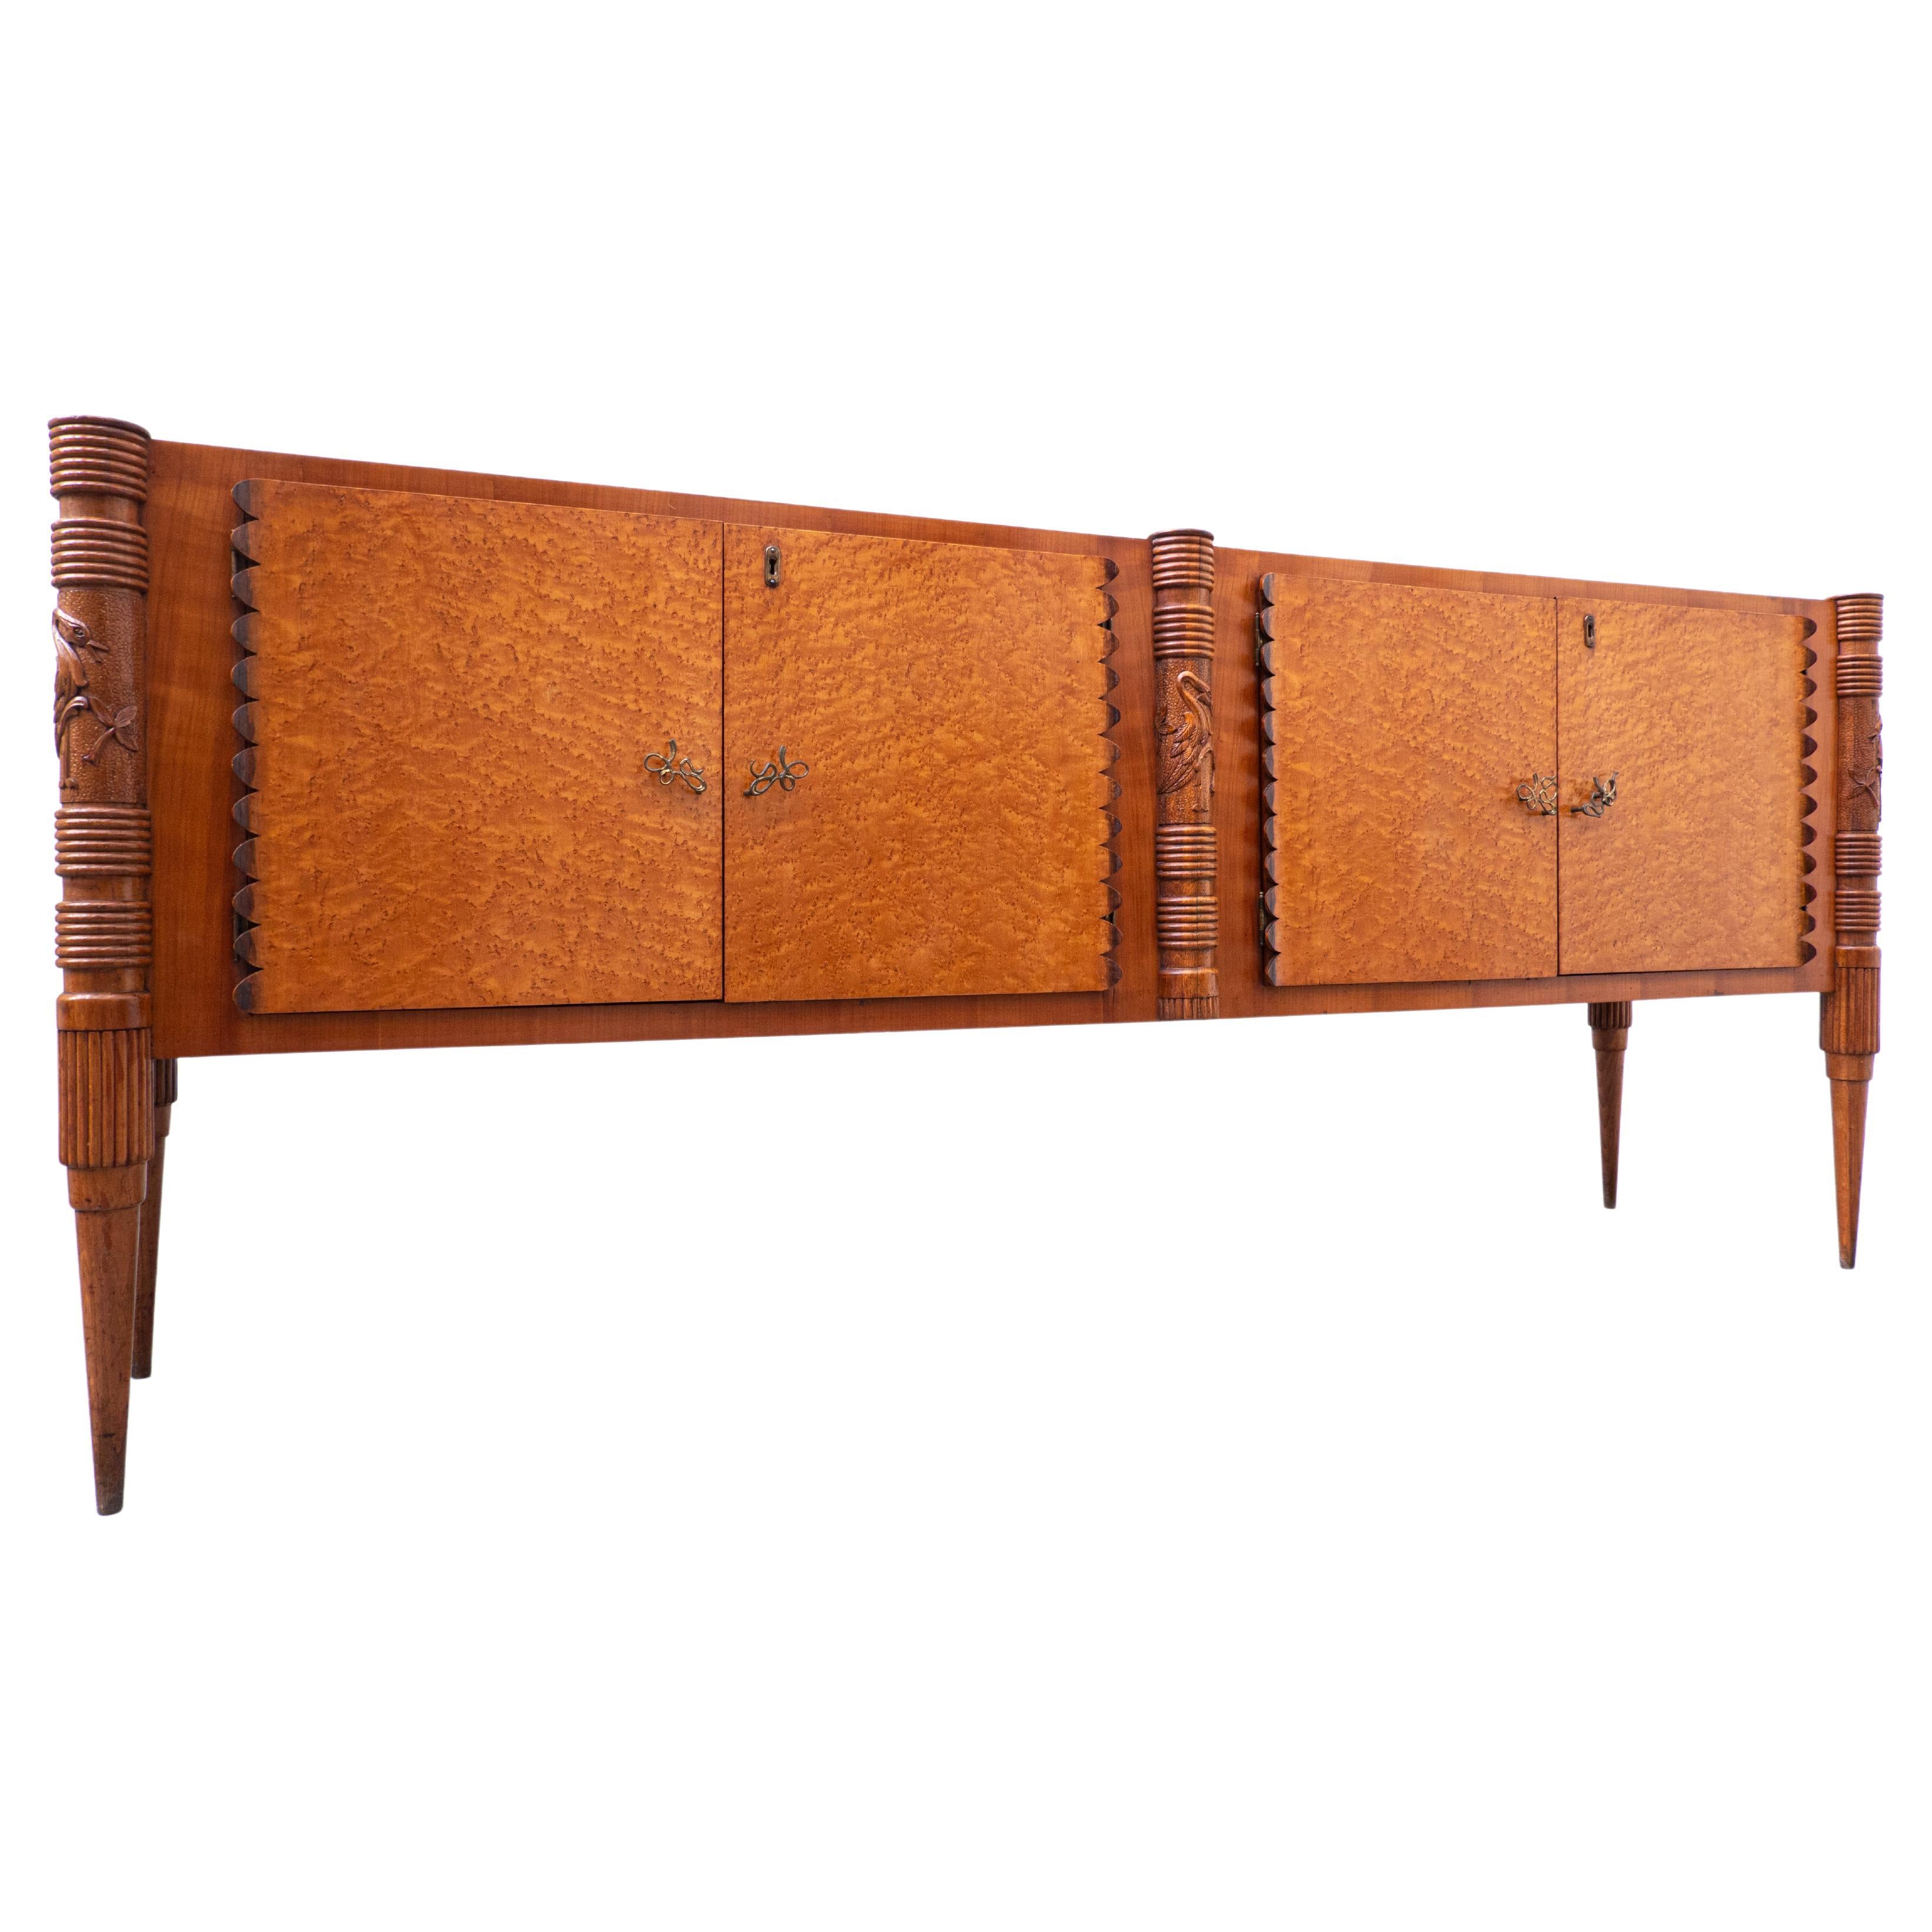 Large Italian Wooden Sideboard by Pier Luigi Colli with Four Doors, 1940s